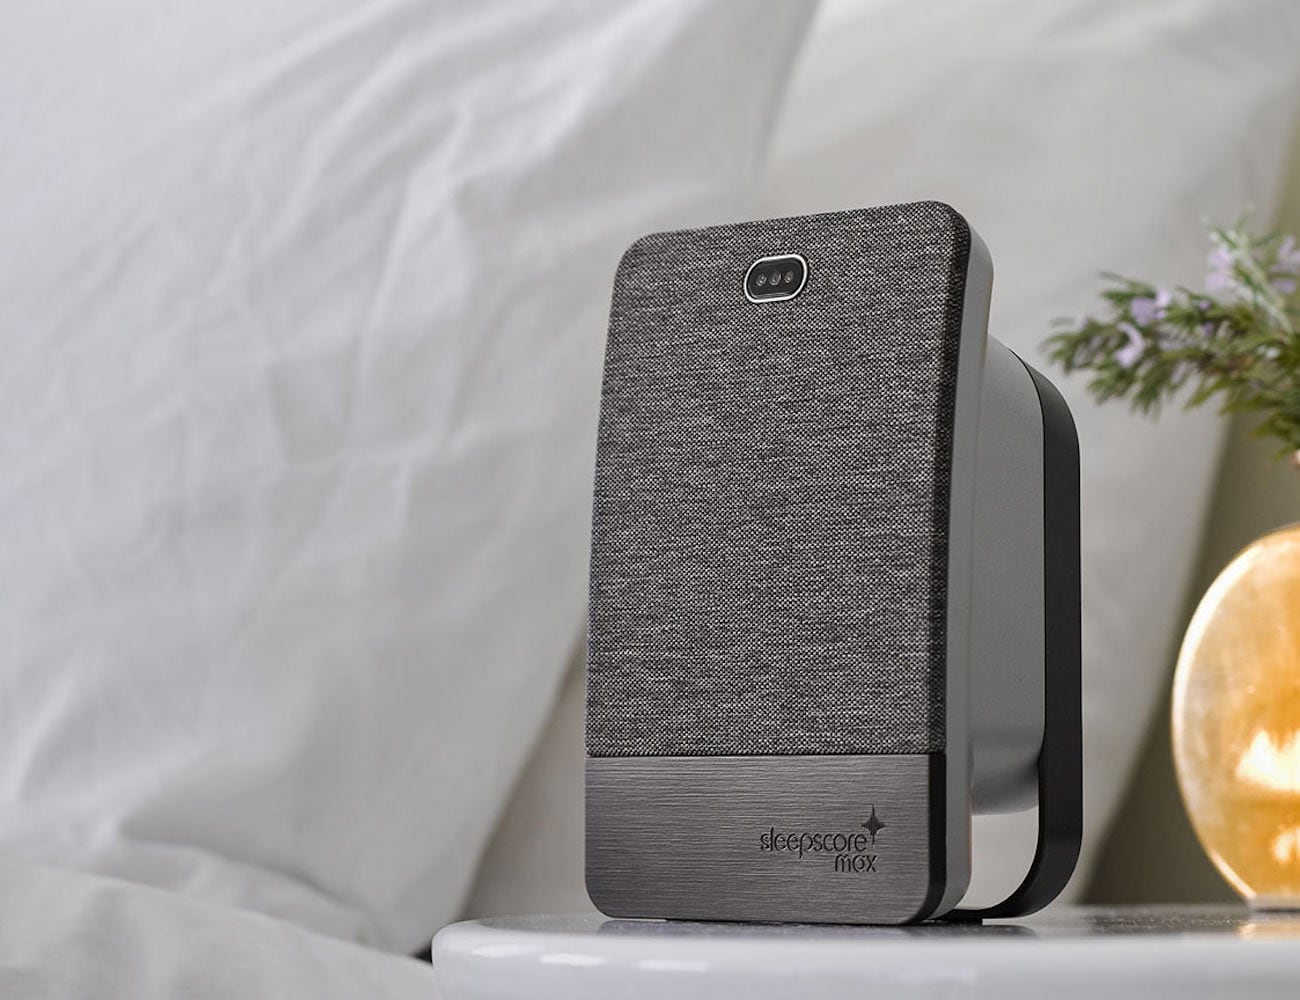 17 Bedside products every modern bedroom needs